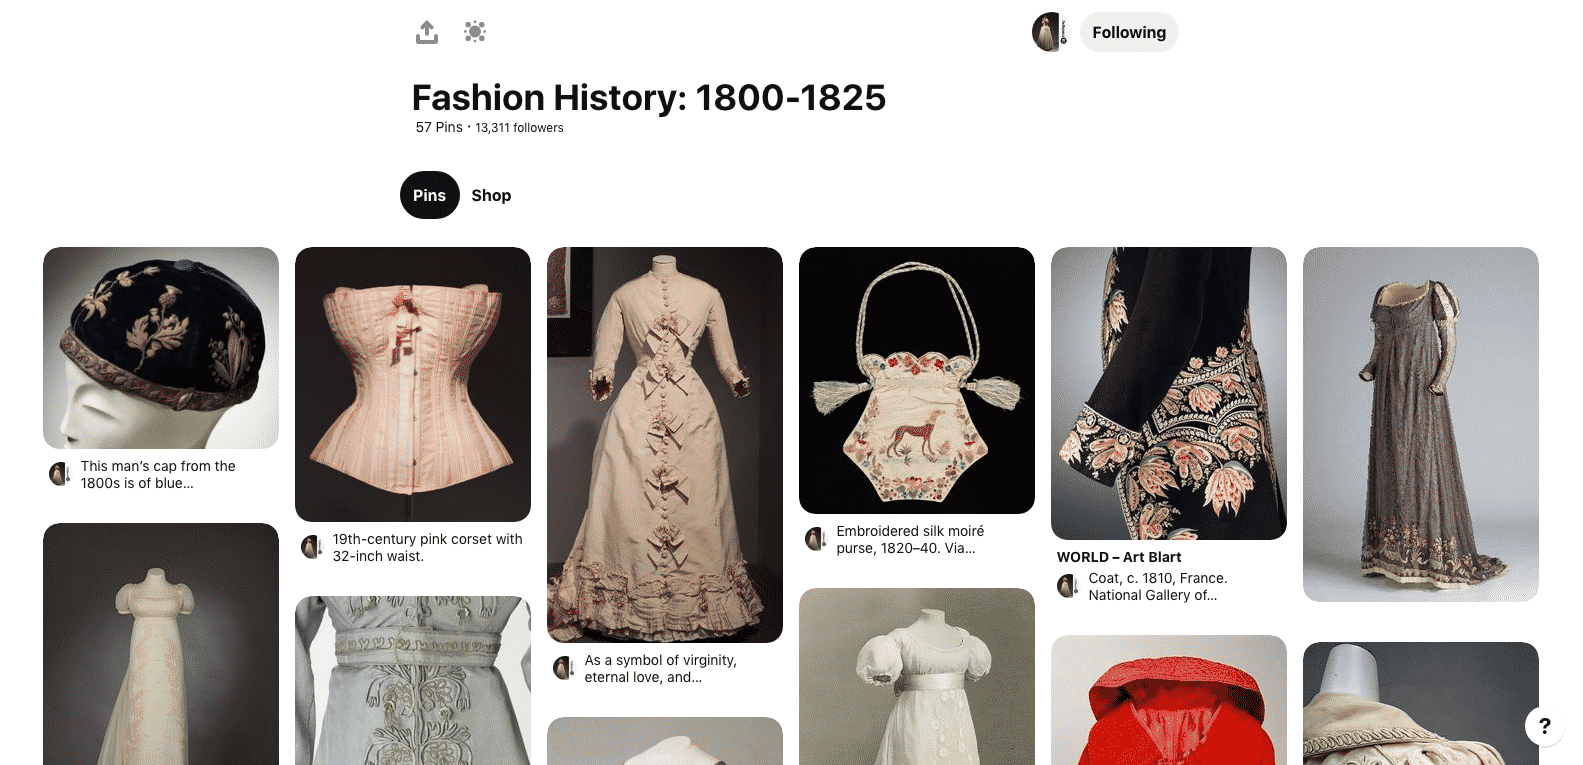 Example of a Fashion History Pinterest board from the Museum at FIT.